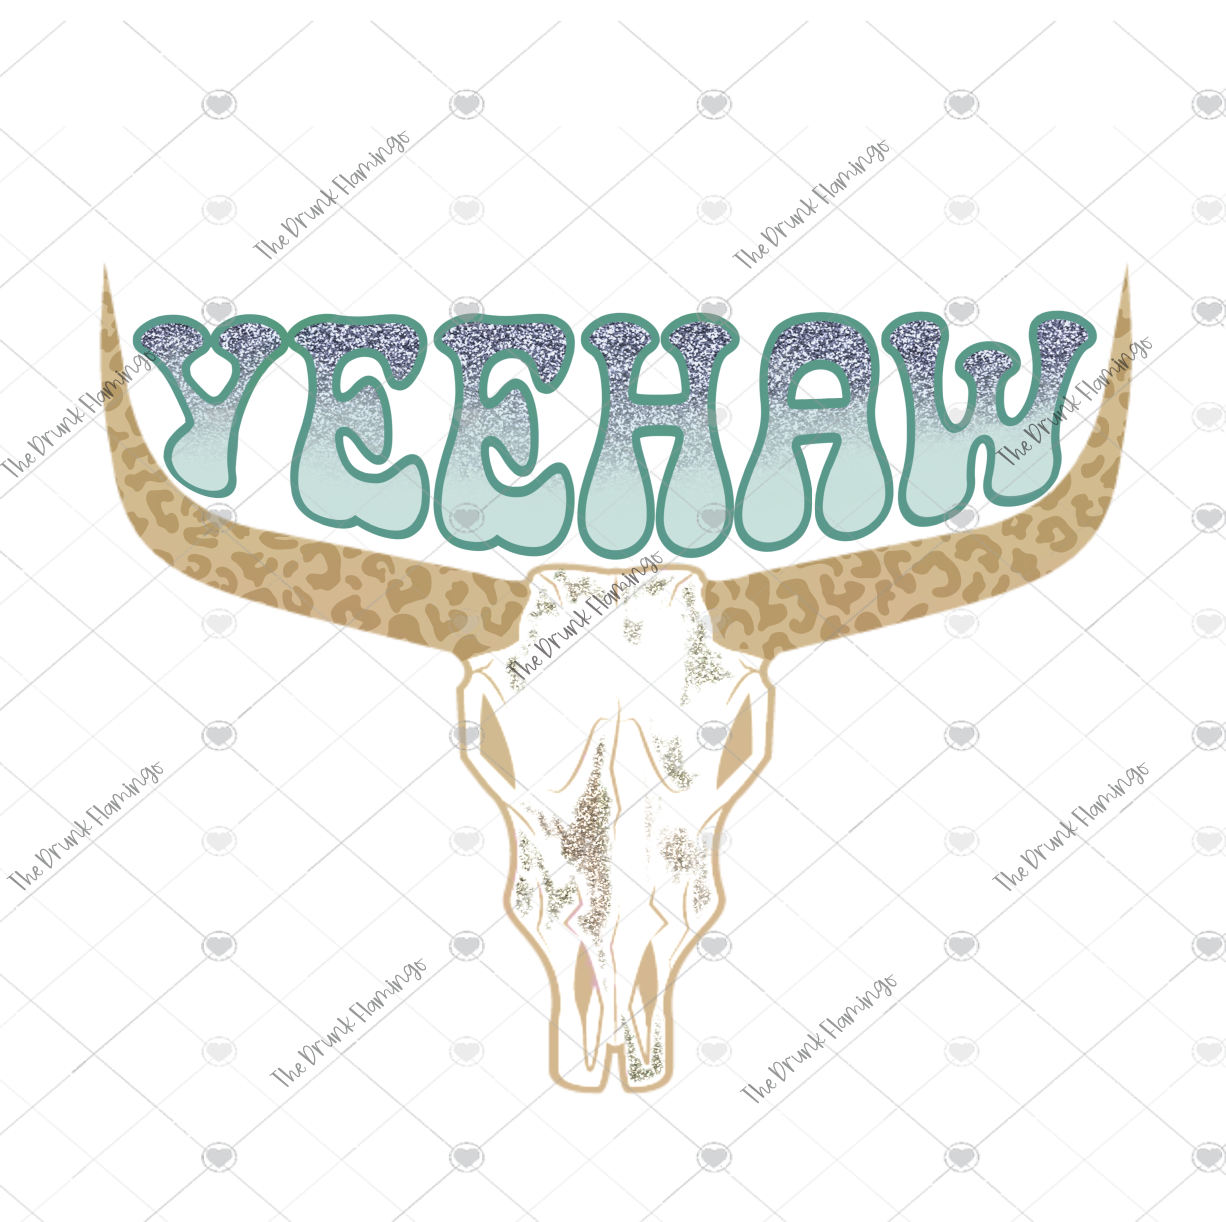 69- YEEHAW Blue WHITE backed decal